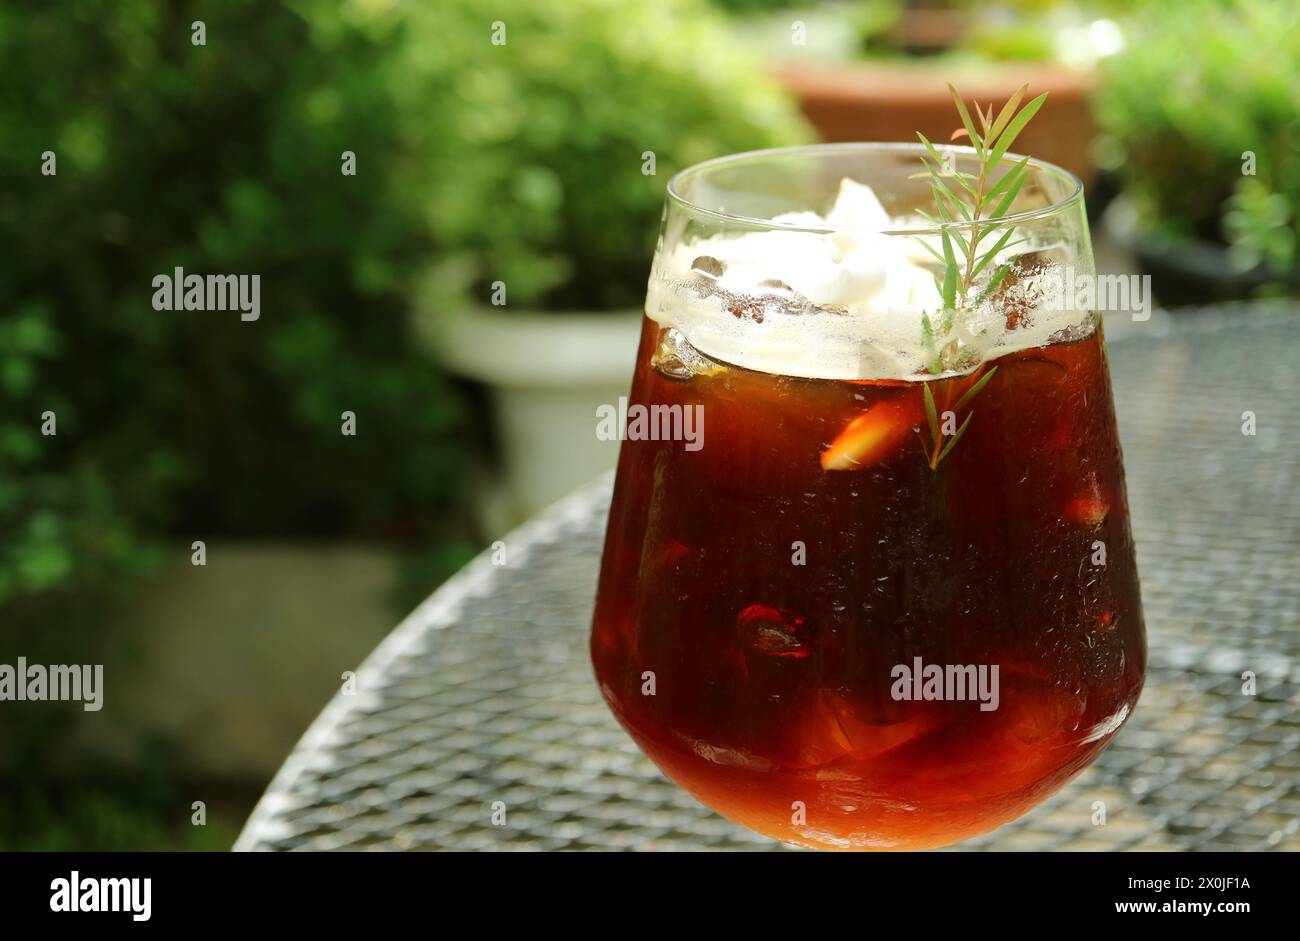 Closeup of a Glass of Iced Coffee at the Outdoor Seating Stock Photo